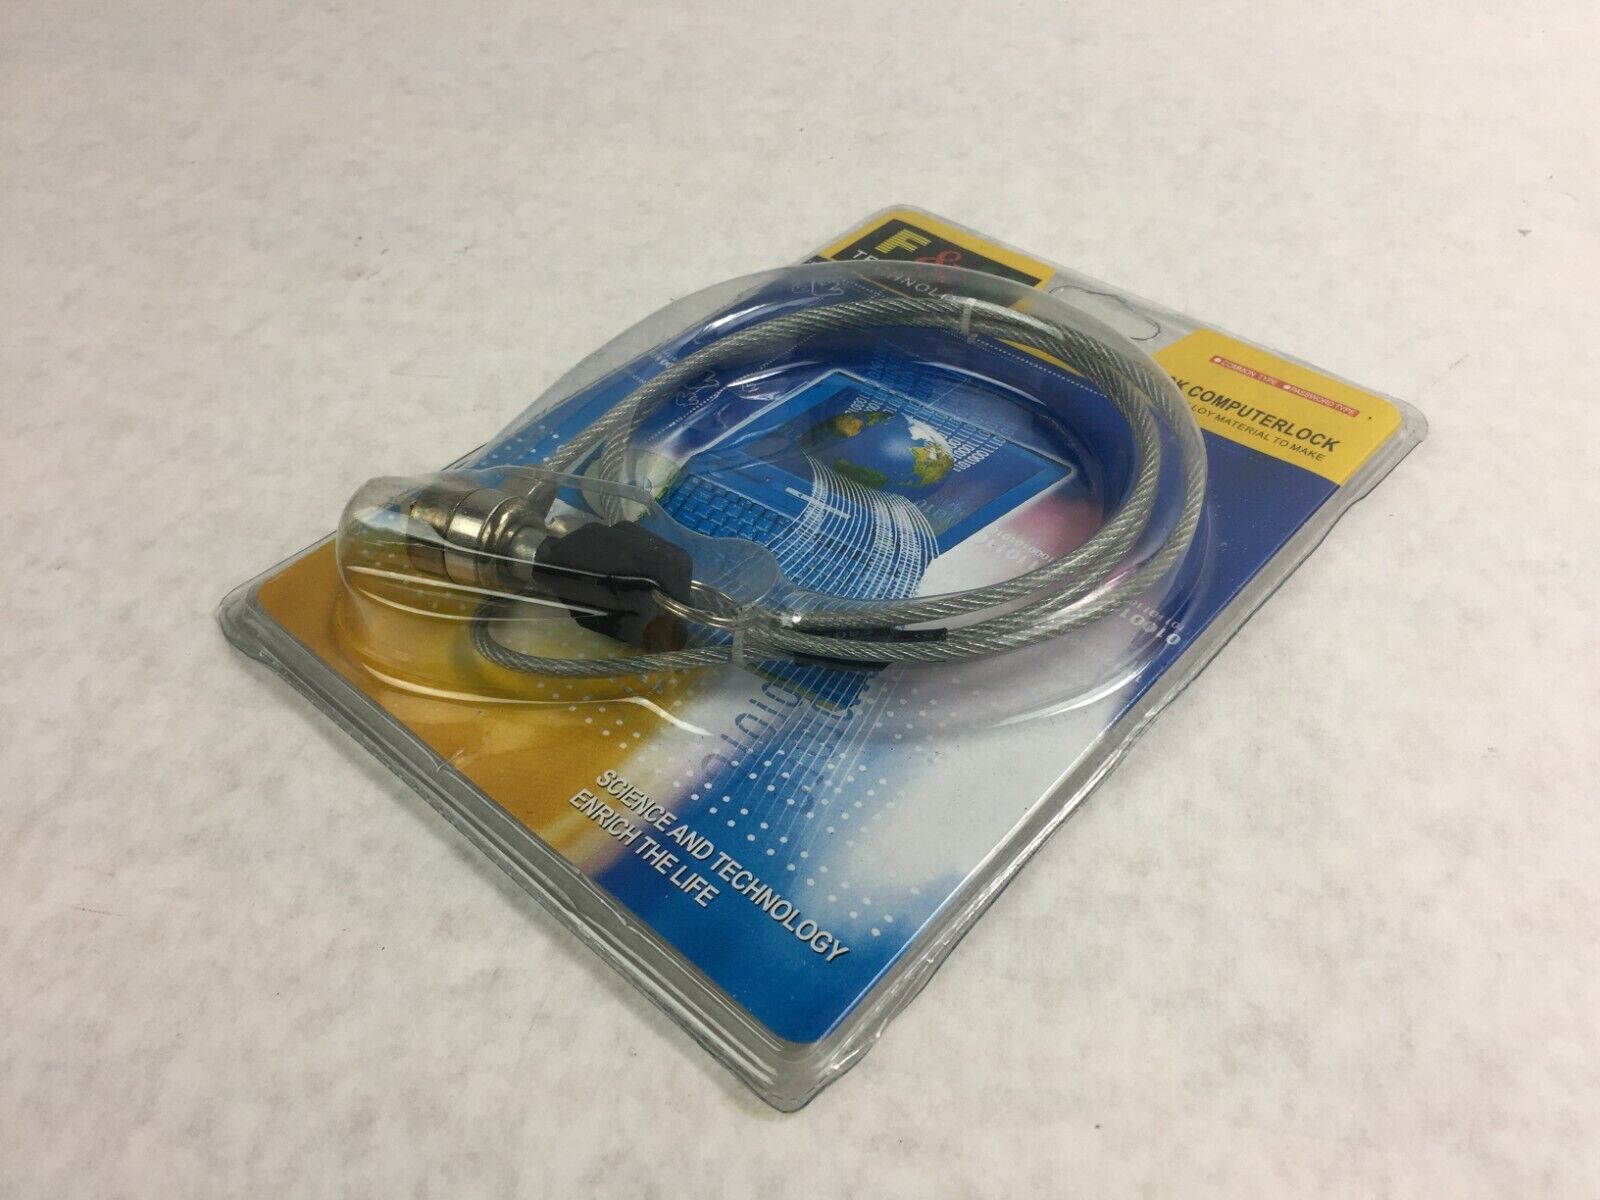 F & K Technology Notebook Computer Cable  Key Lock   New  Factory Sealed Package